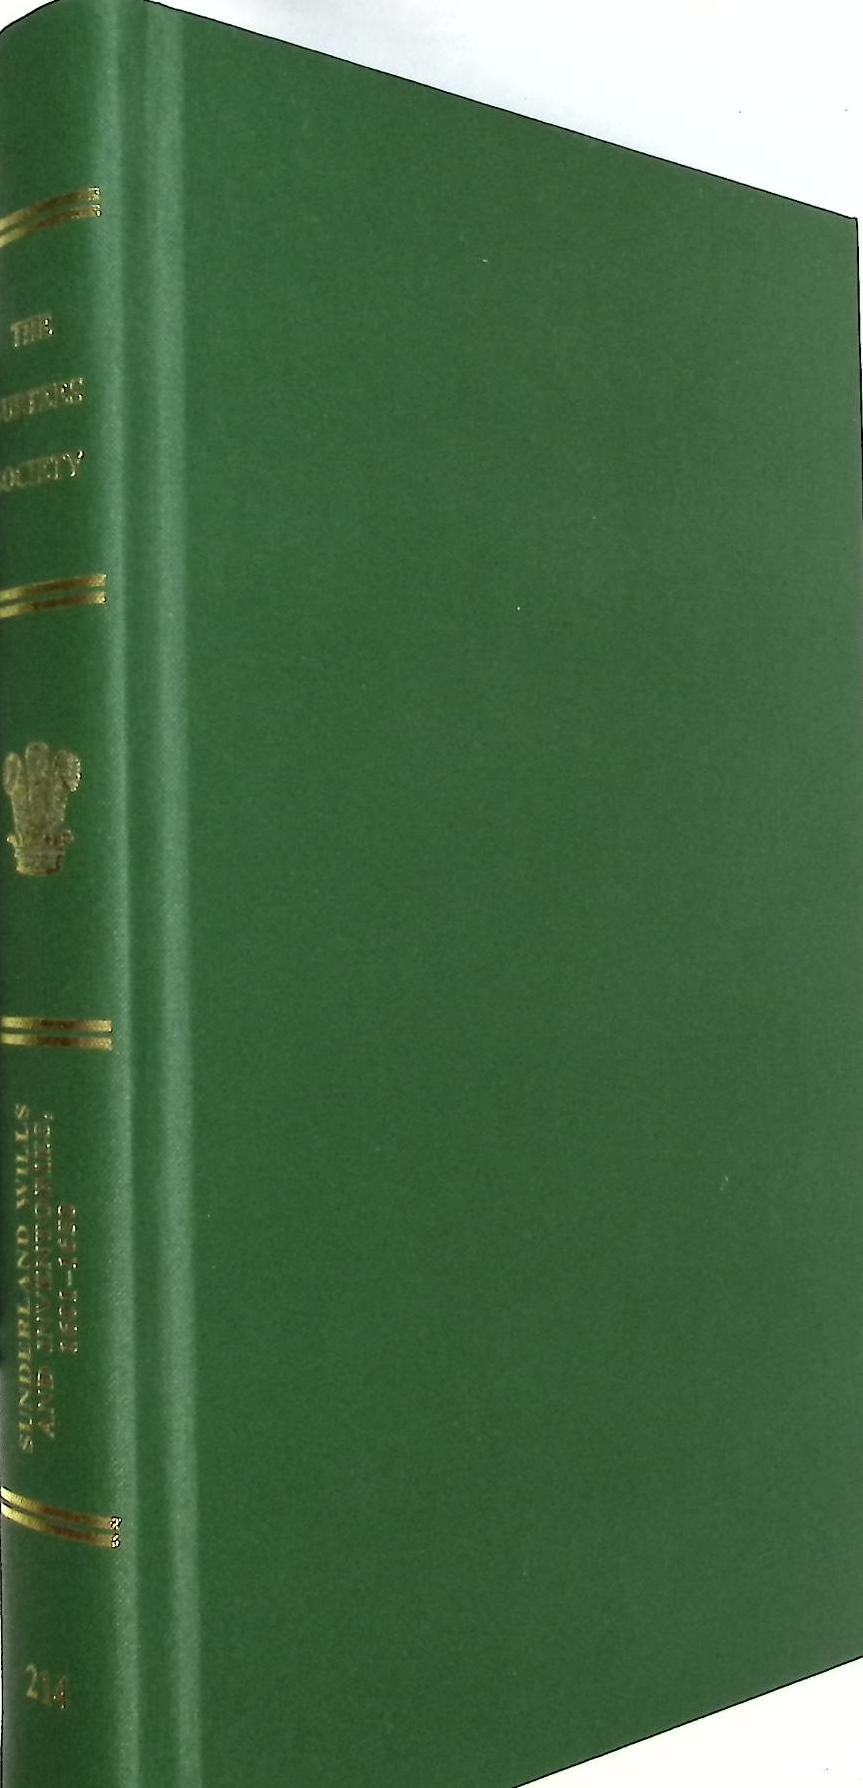 Two Weather Diaries from Northern England. The Journals of John Chipchase and Elihu Robinson. The Surtees Society Vol. 222